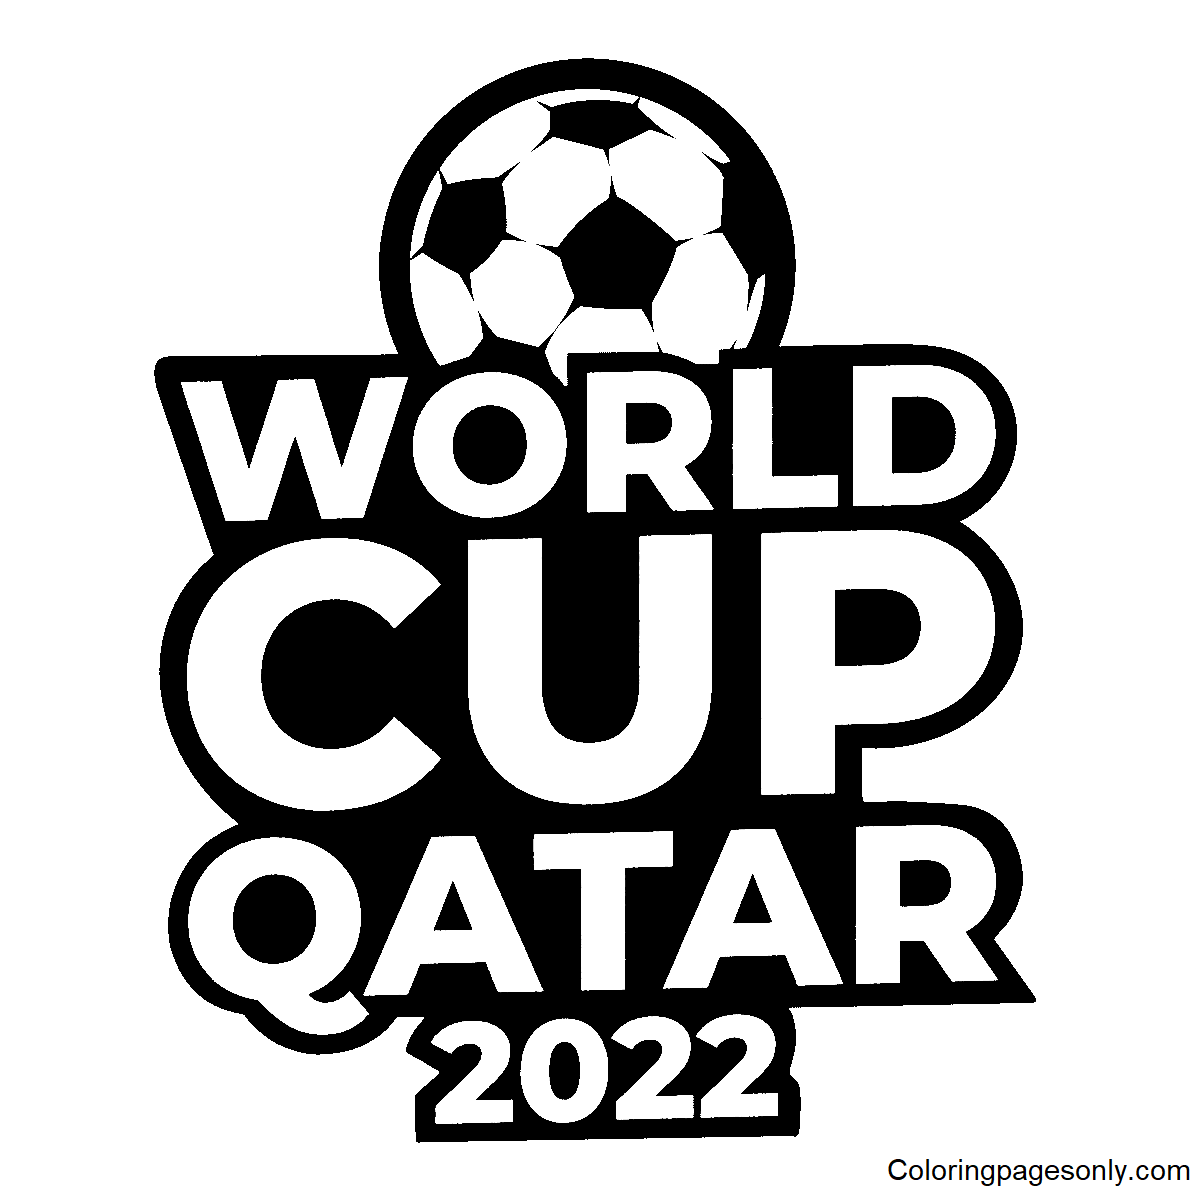 World Cup 2022 In Qatar Coloring Page